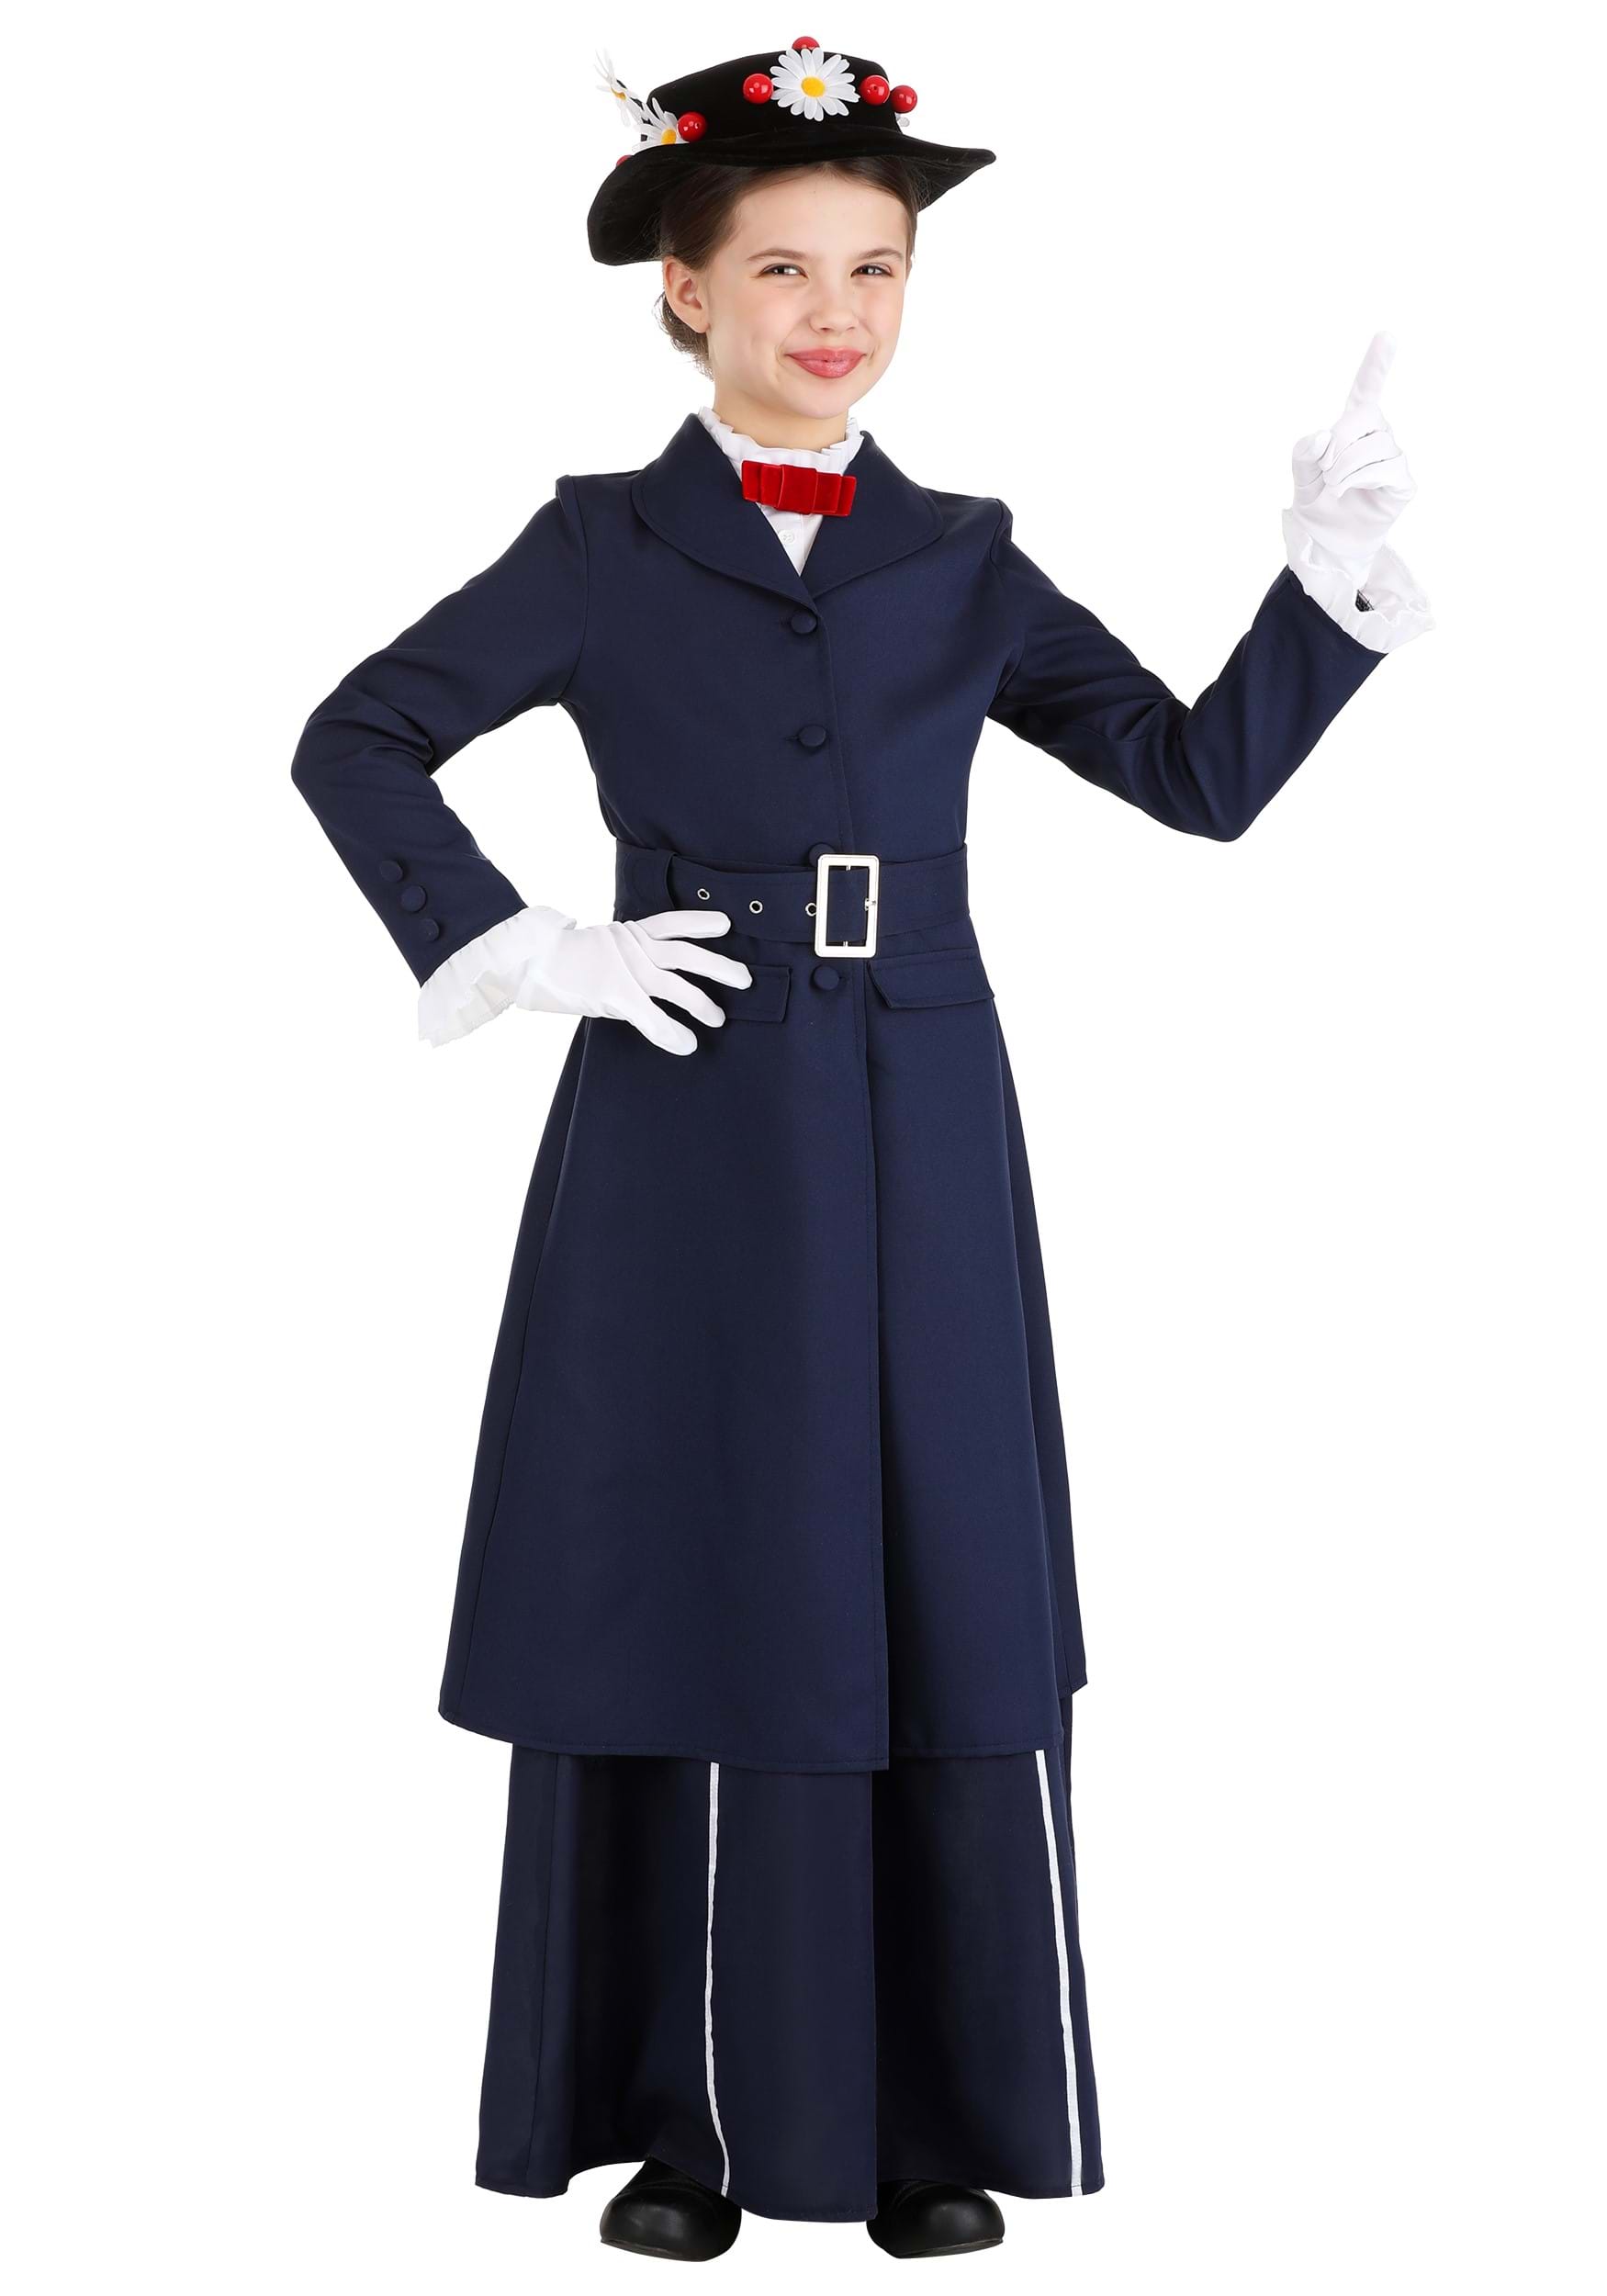 Photos - Fancy Dress Mary Poppins FUN Costumes  Girl's Costume Blue/Red/White FUN2812CH 